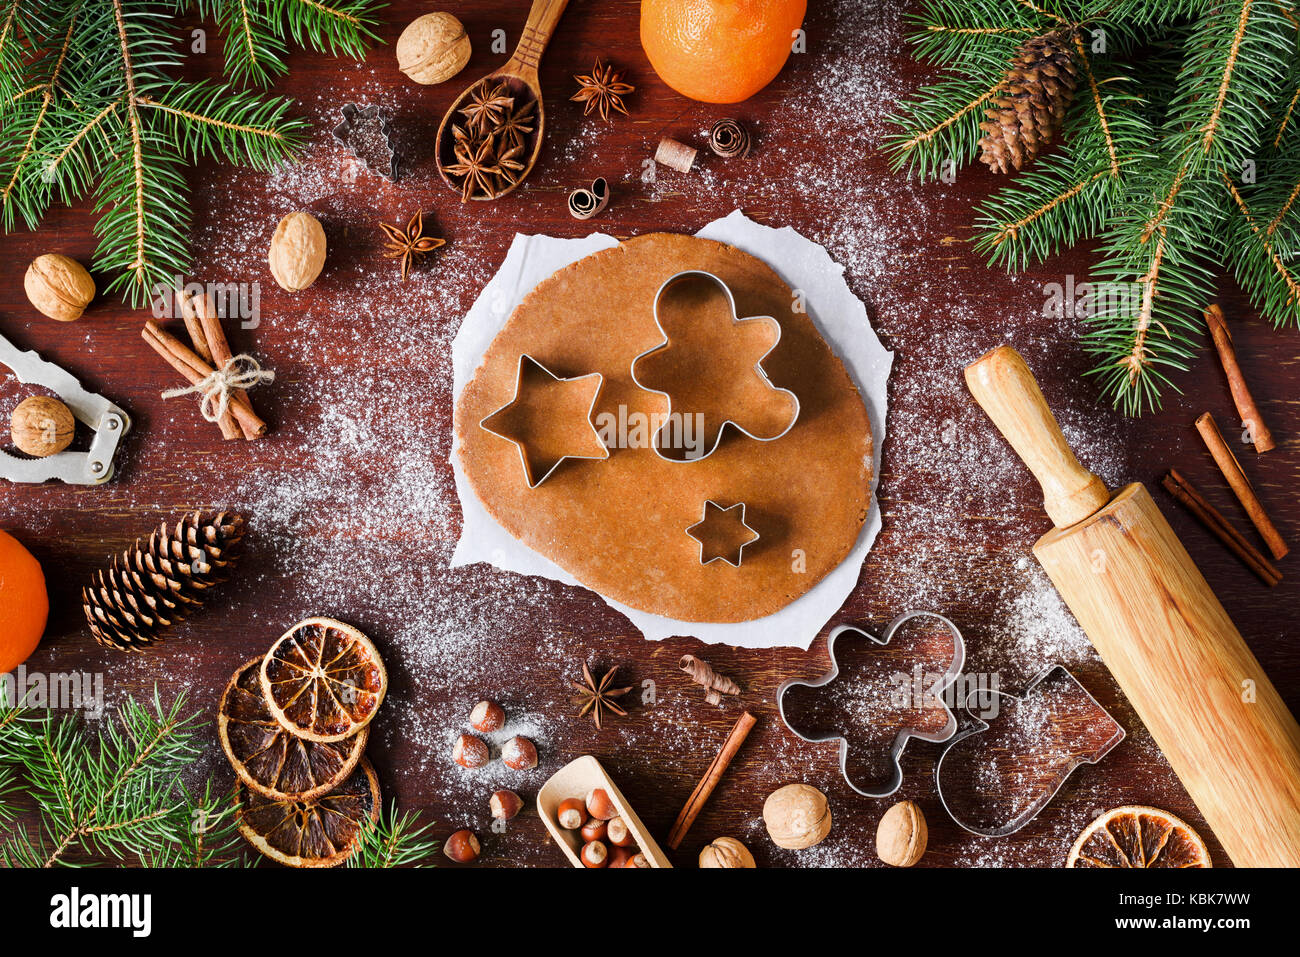 Gingerbread cookies preparation. Christmas cookies baking on wooden background. Christmas decorations, gingerbread cookie dough, cookie cutters, spice Stock Photo